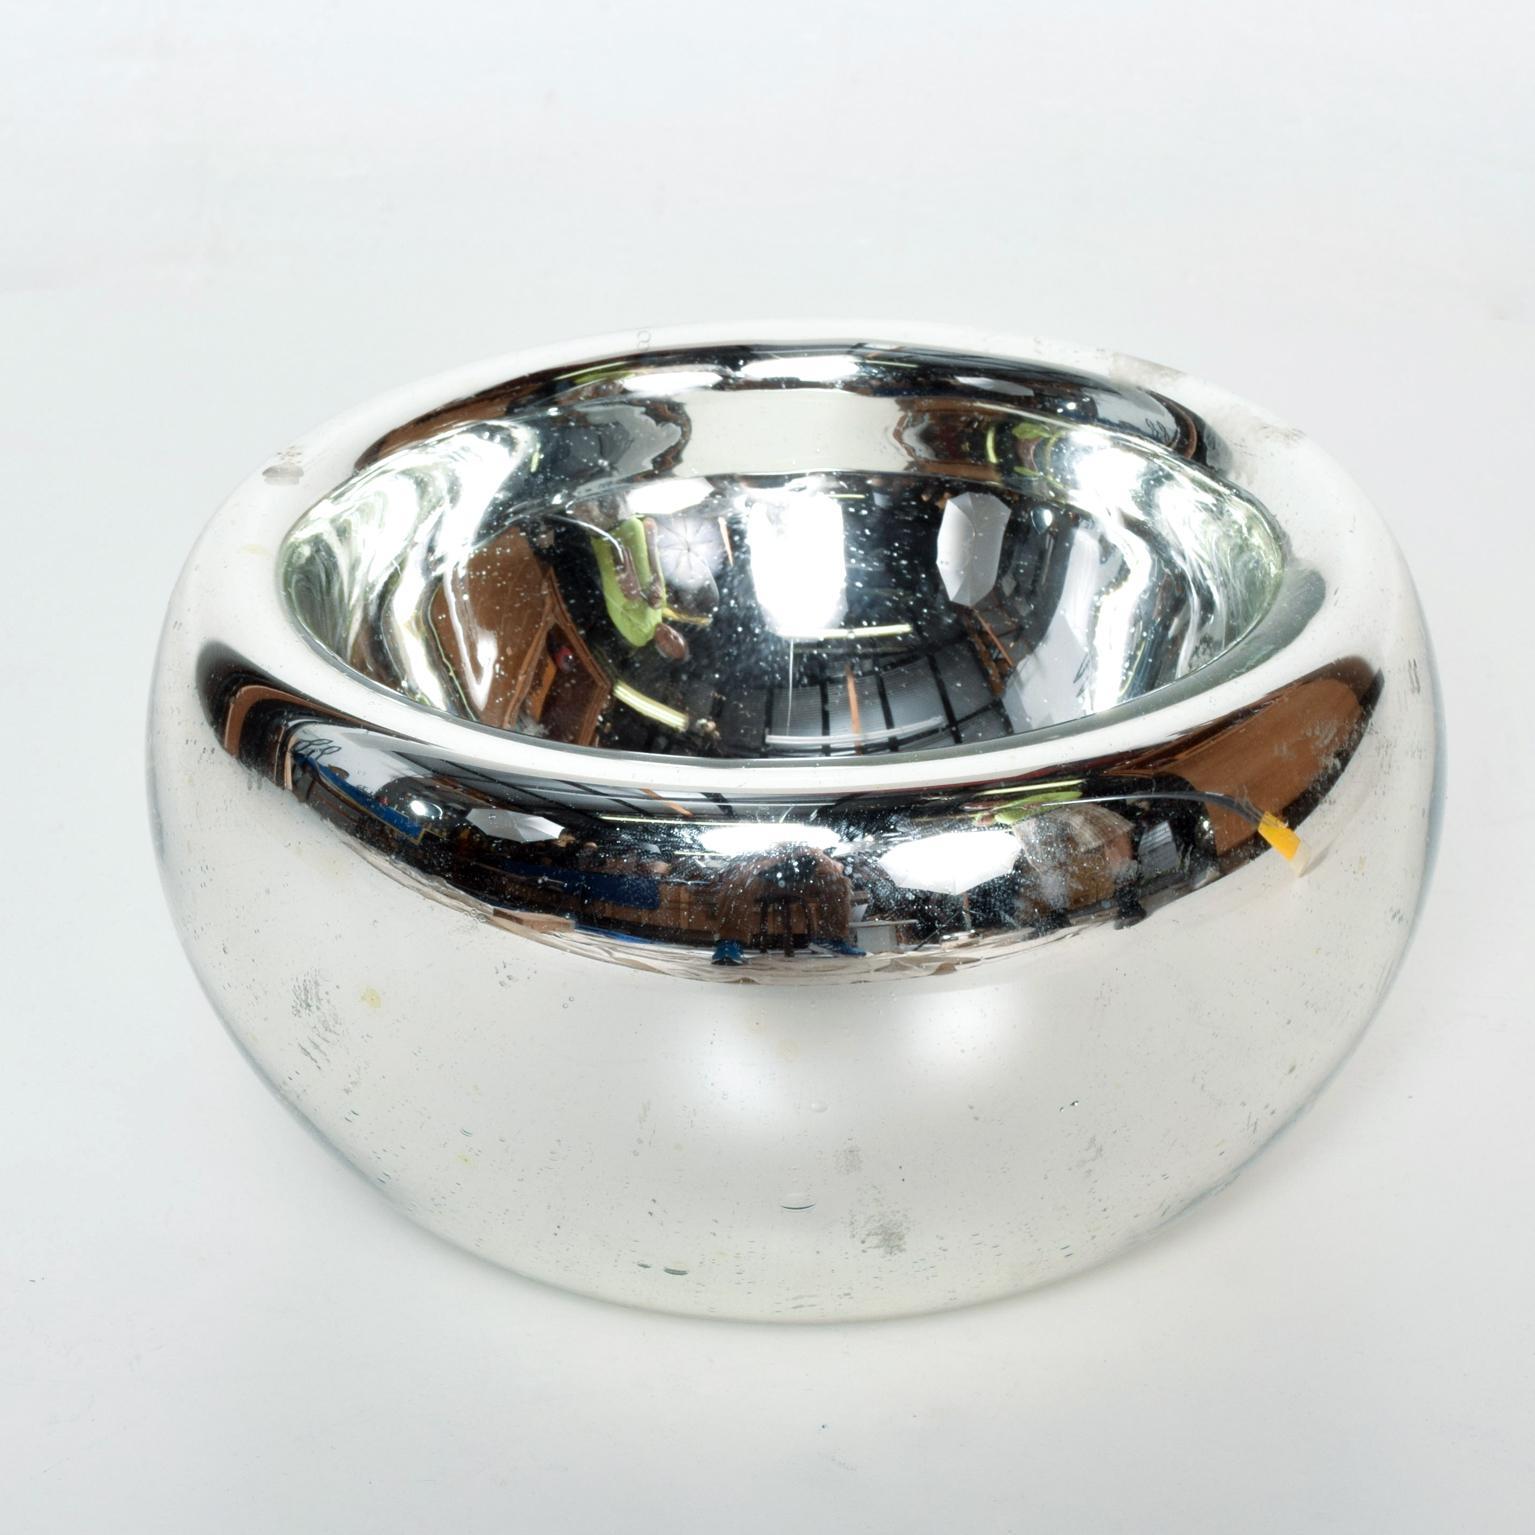 For you: Mid Century Modern Large Mercury Glass Bowl in Silver.
Reference: ACCGM1202193
Measures 6 1/2